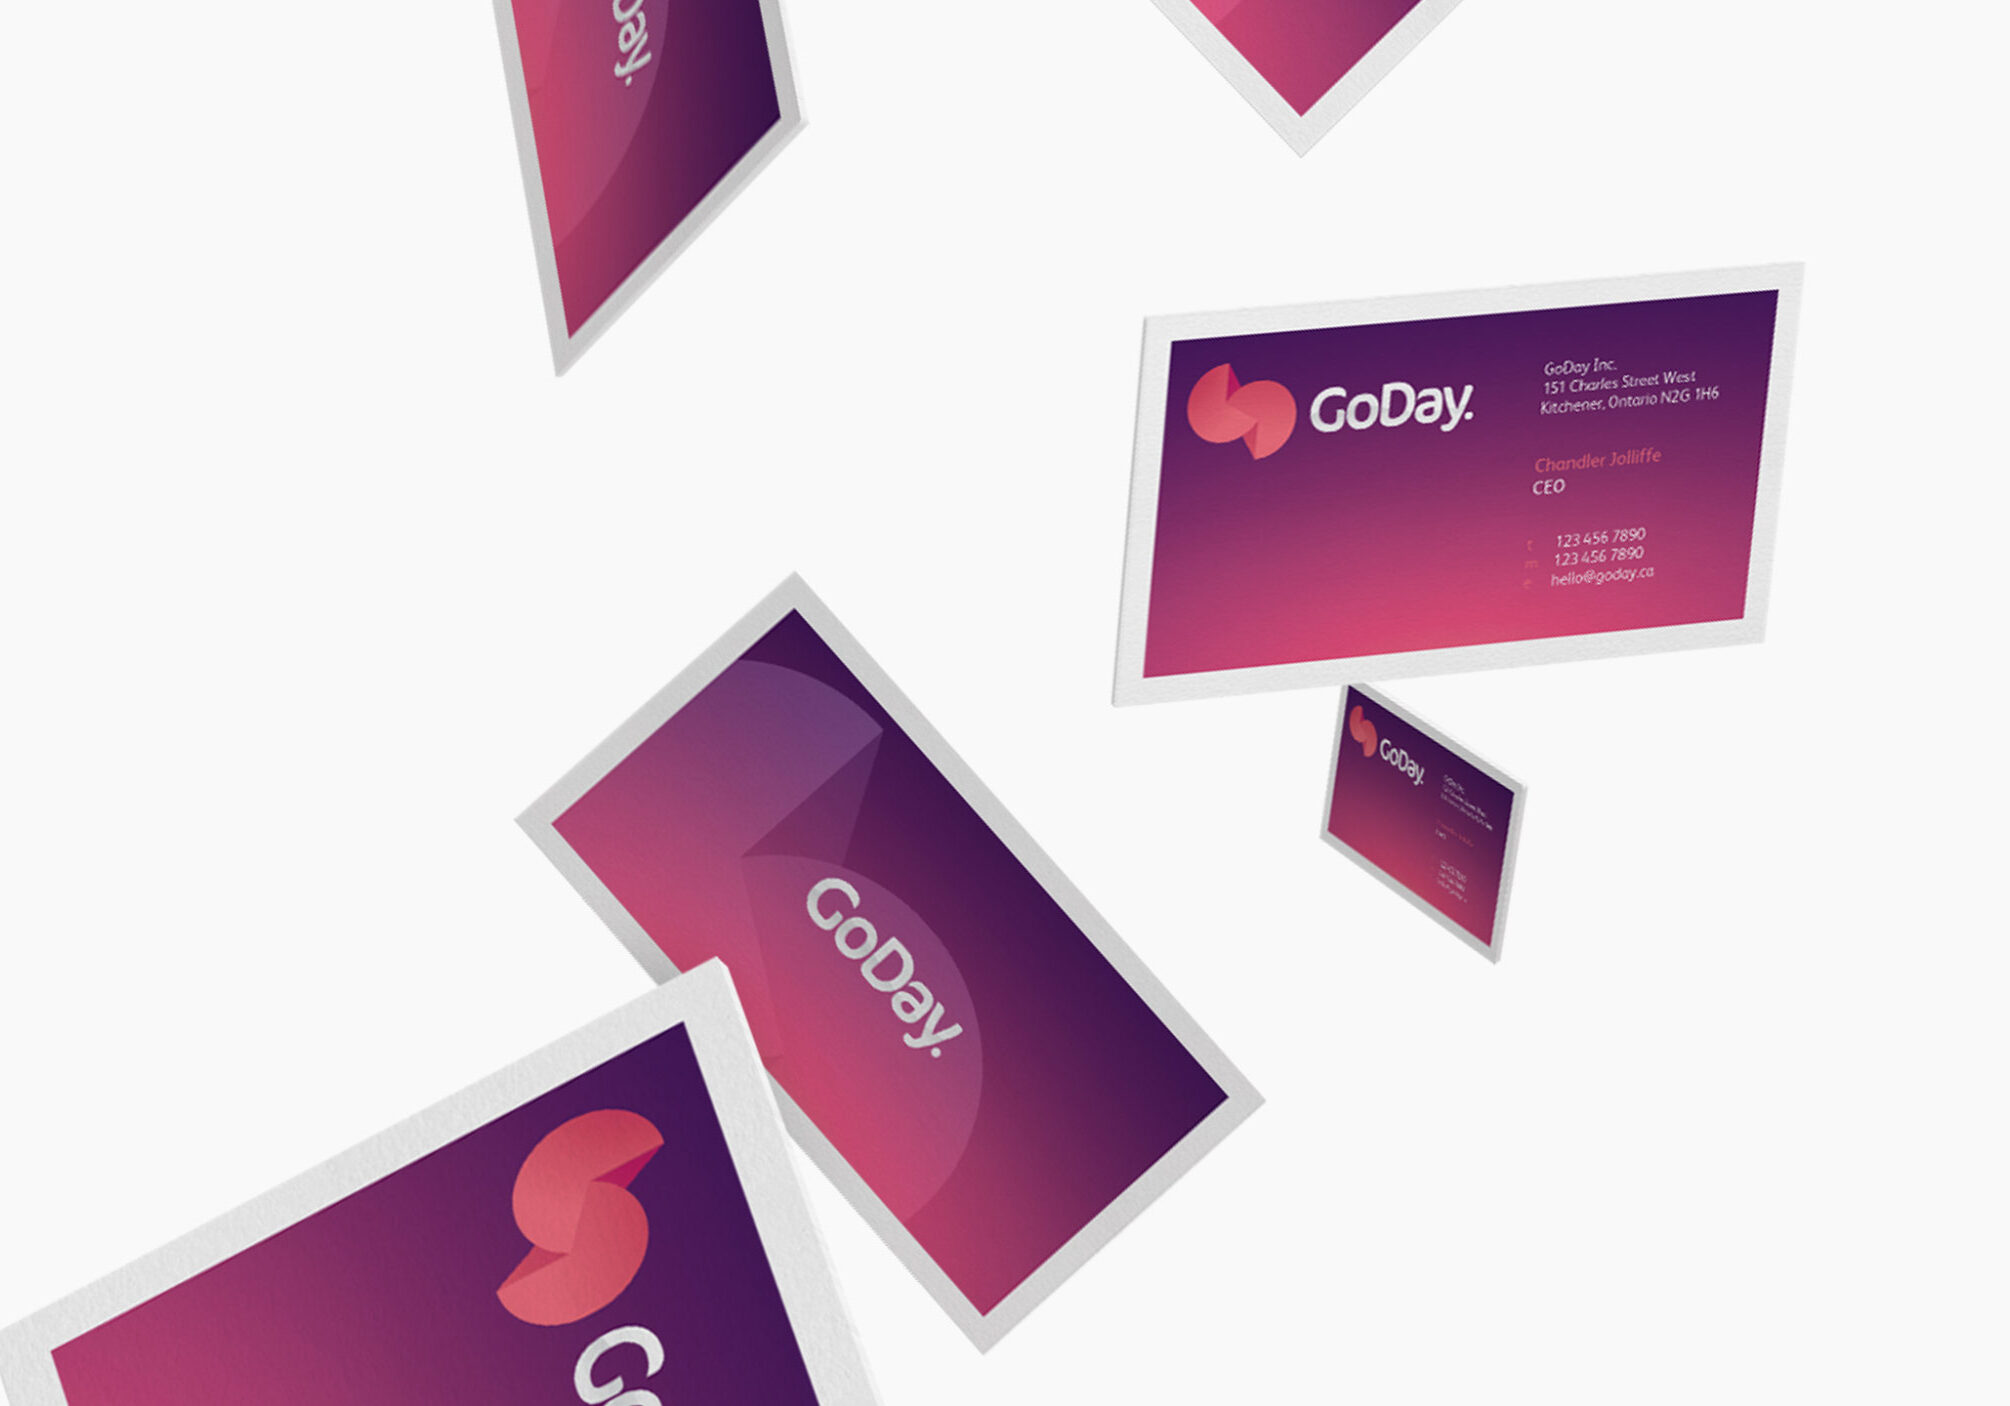 Branding for GoDay by The Coopers